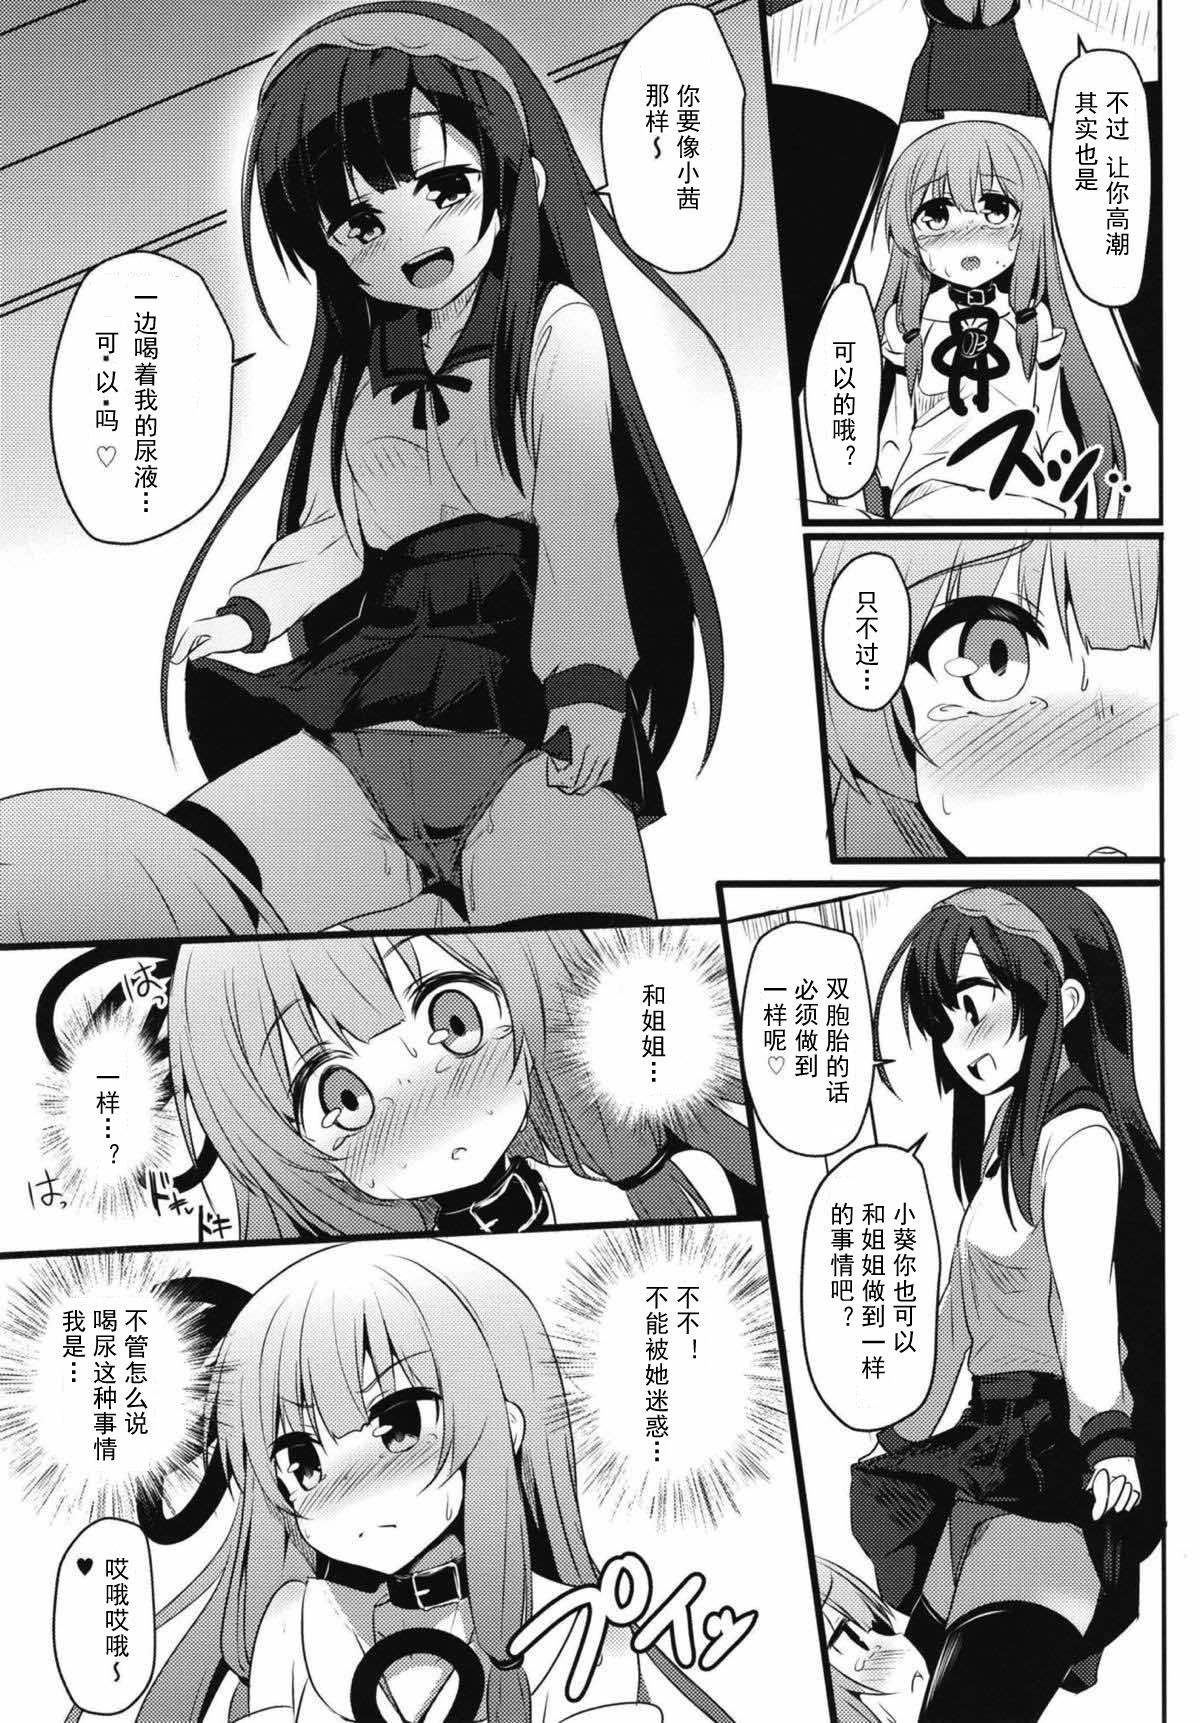 Hardcore (Kotonoha's Festa 2) [Milk Pudding (Jamcy)] Akane-chan Challenge! 2.5-kaime (VOICEROID) [Chinese] [古早个人汉化] - Voiceroid Colombiana - Page 11